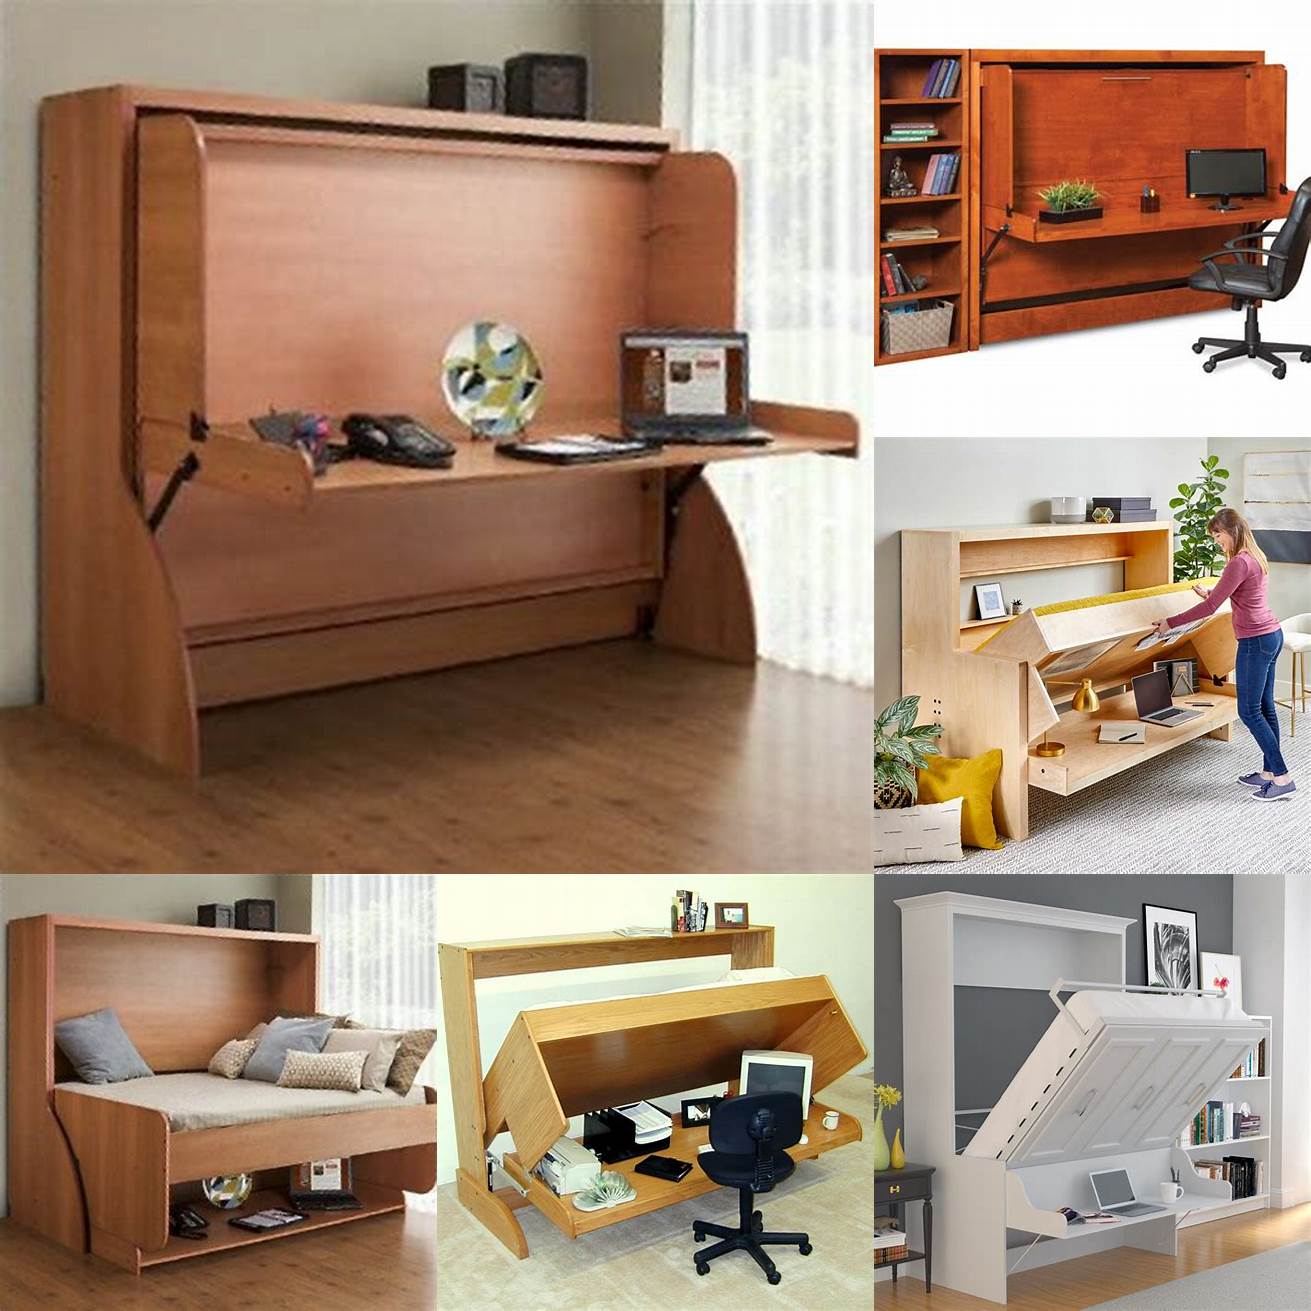 Convenient Desk Beds are easy to use and can be easily converted from a workspace to a bed